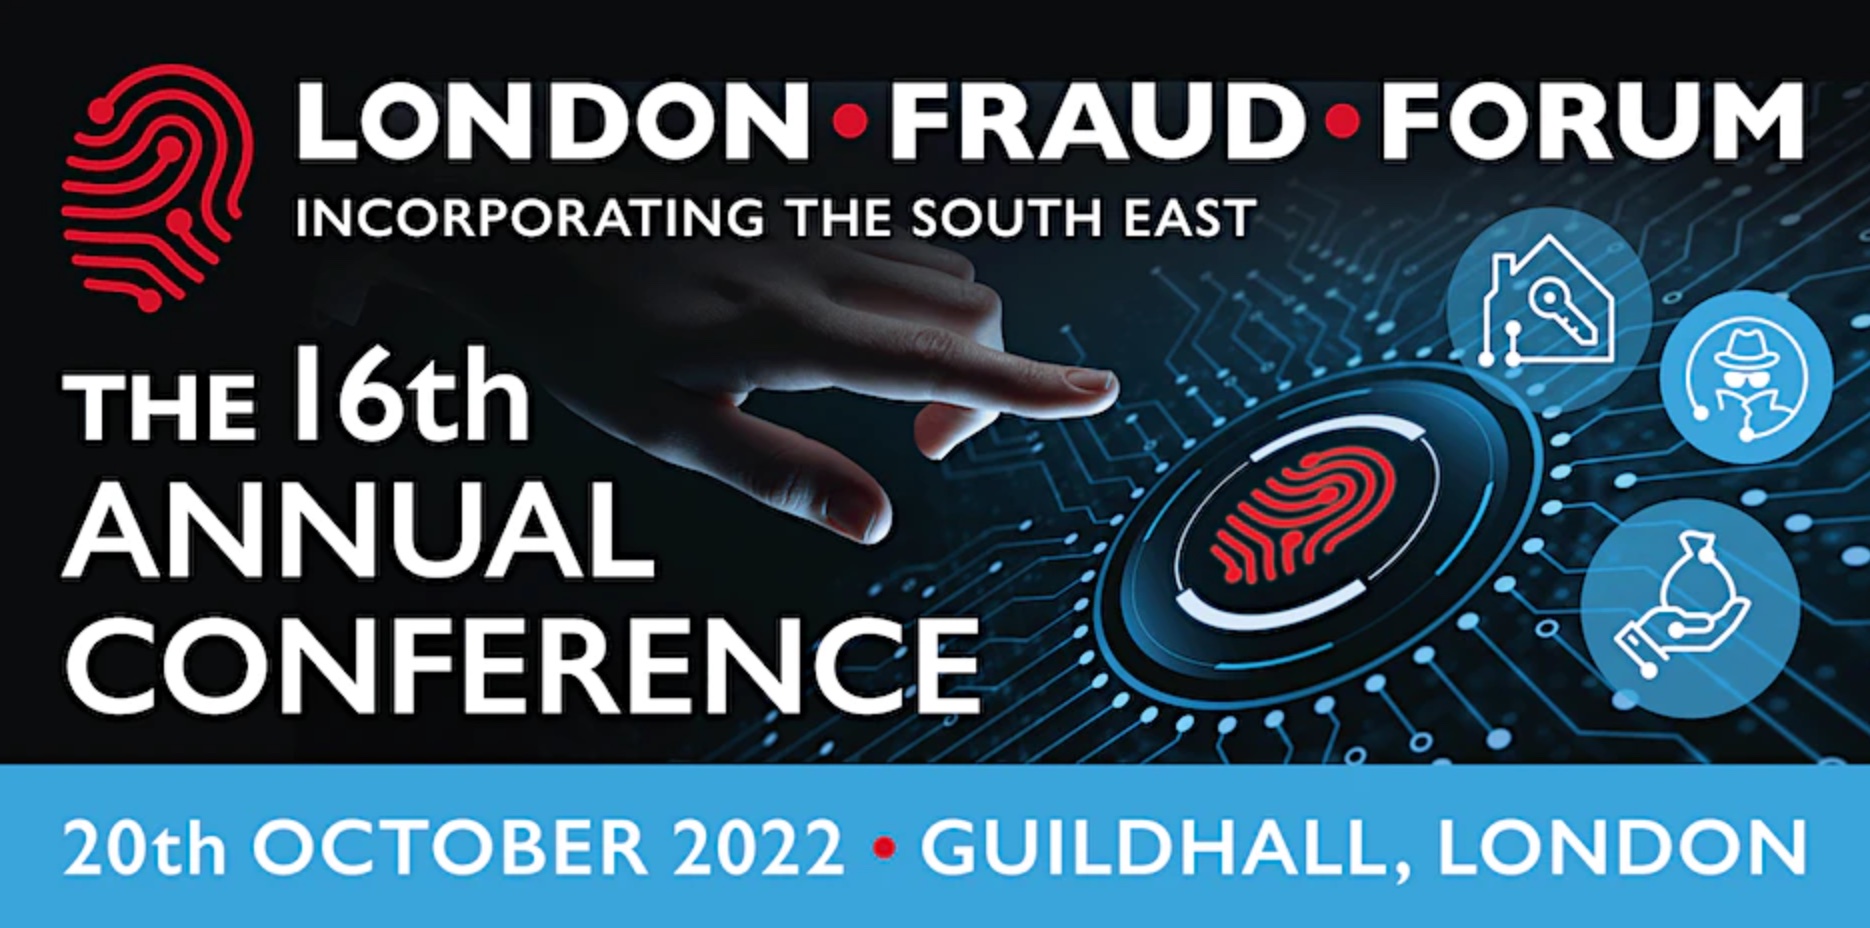 The London Fraud Forum 16th Annual Conference